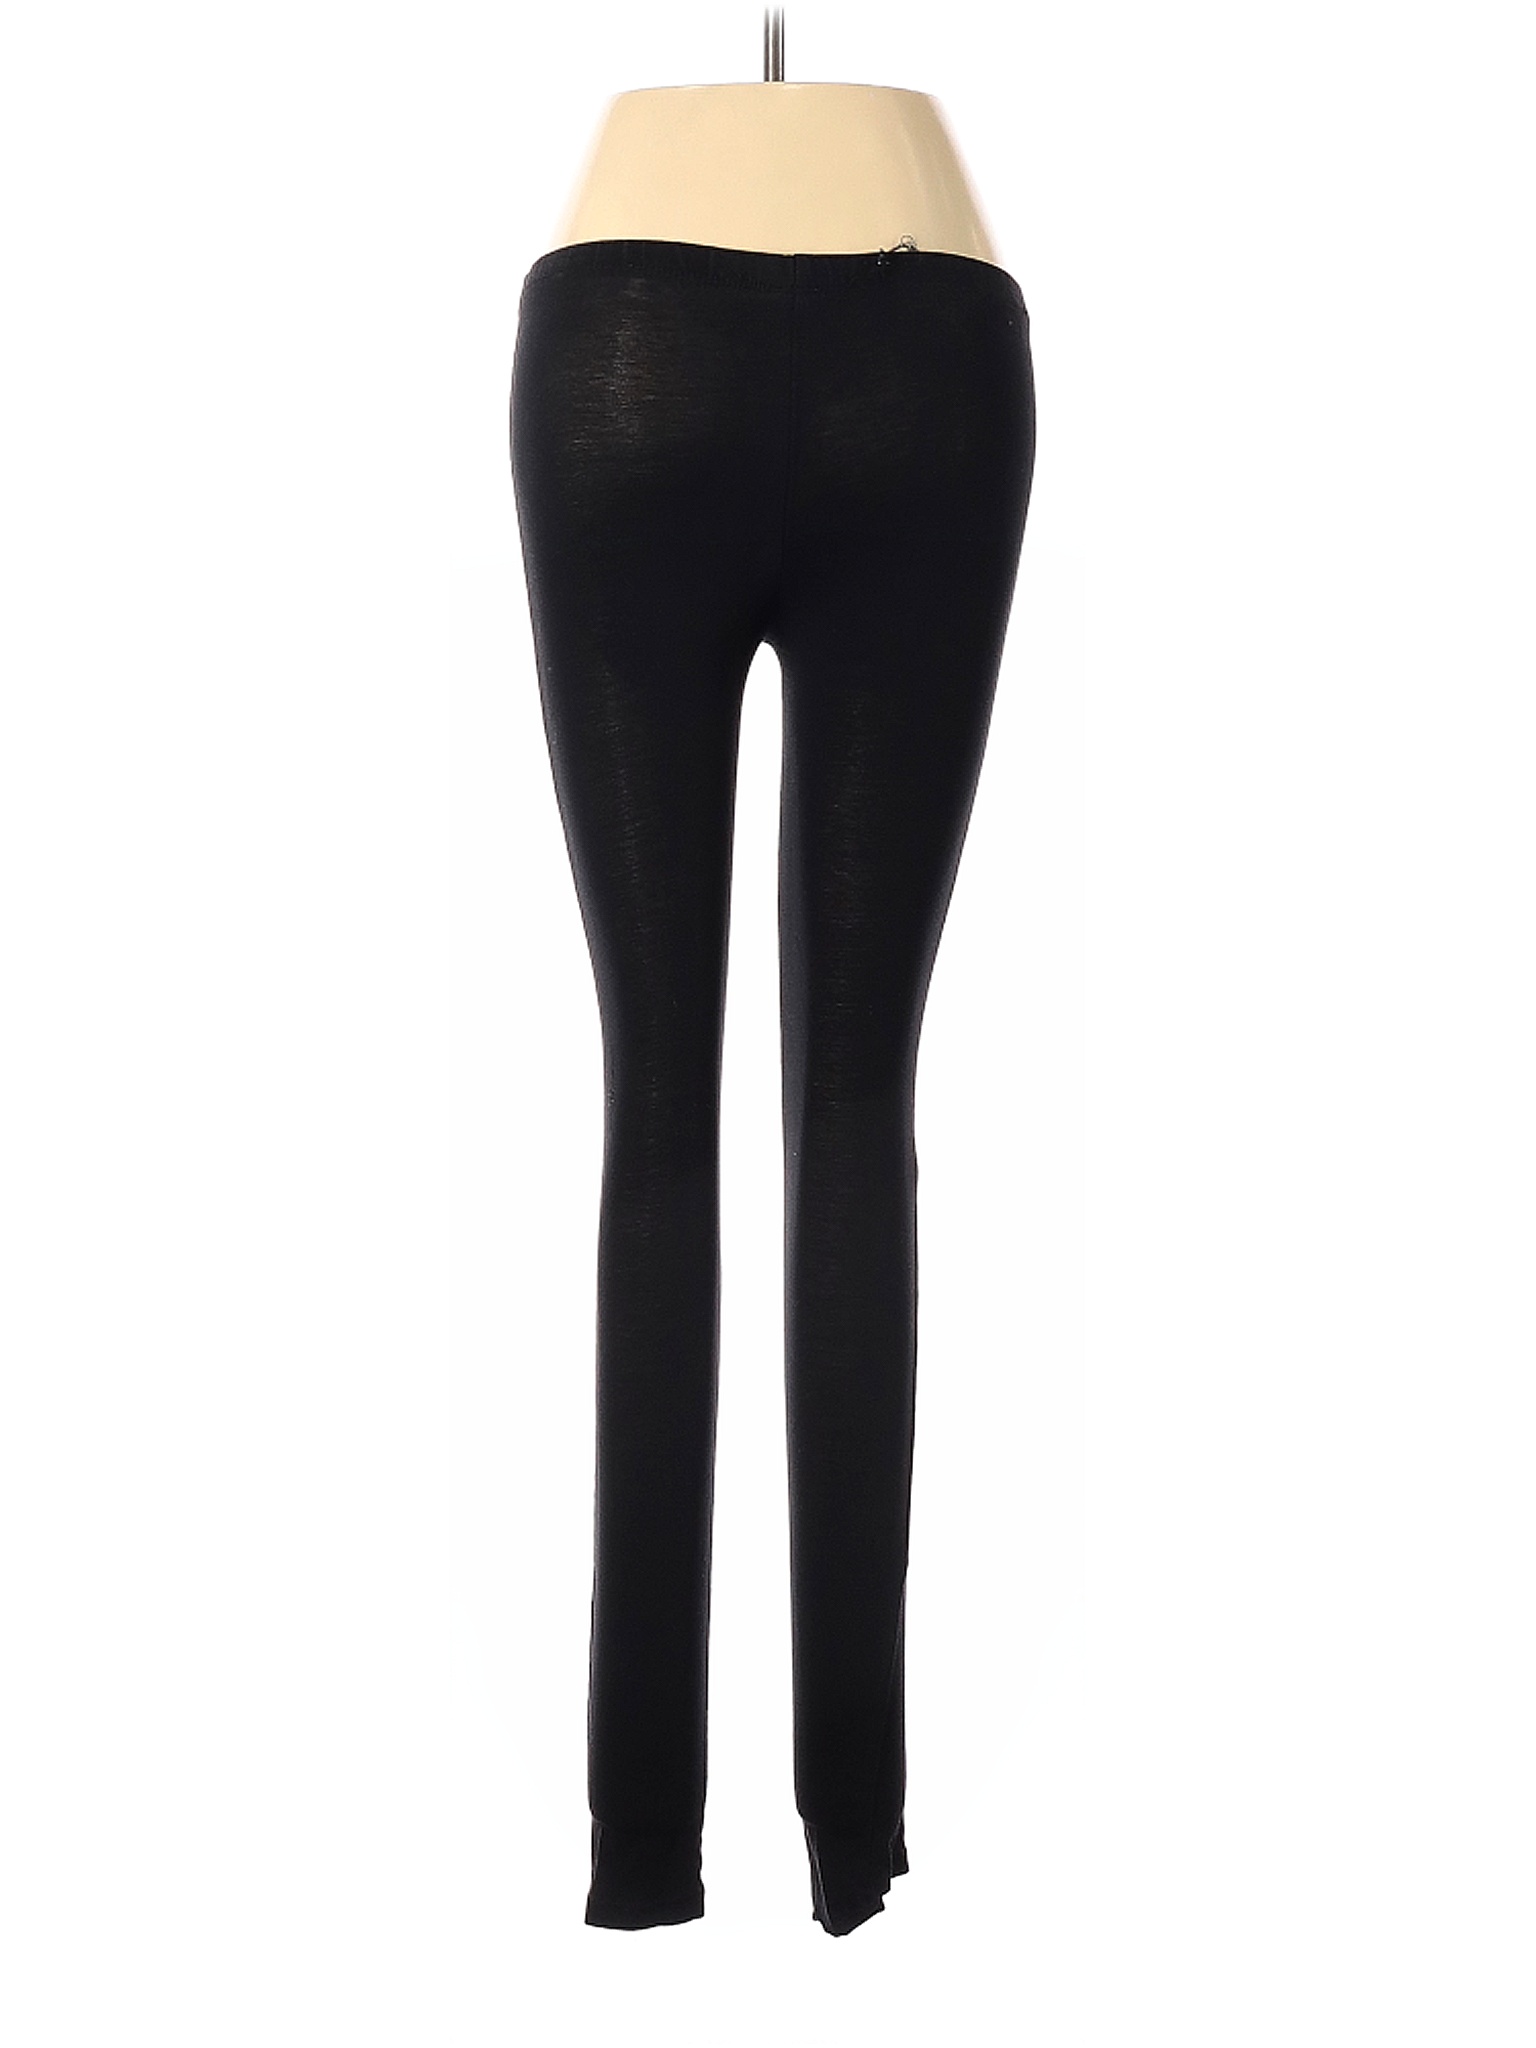 Ambiance Apparel Black Athletic Leggings for Women